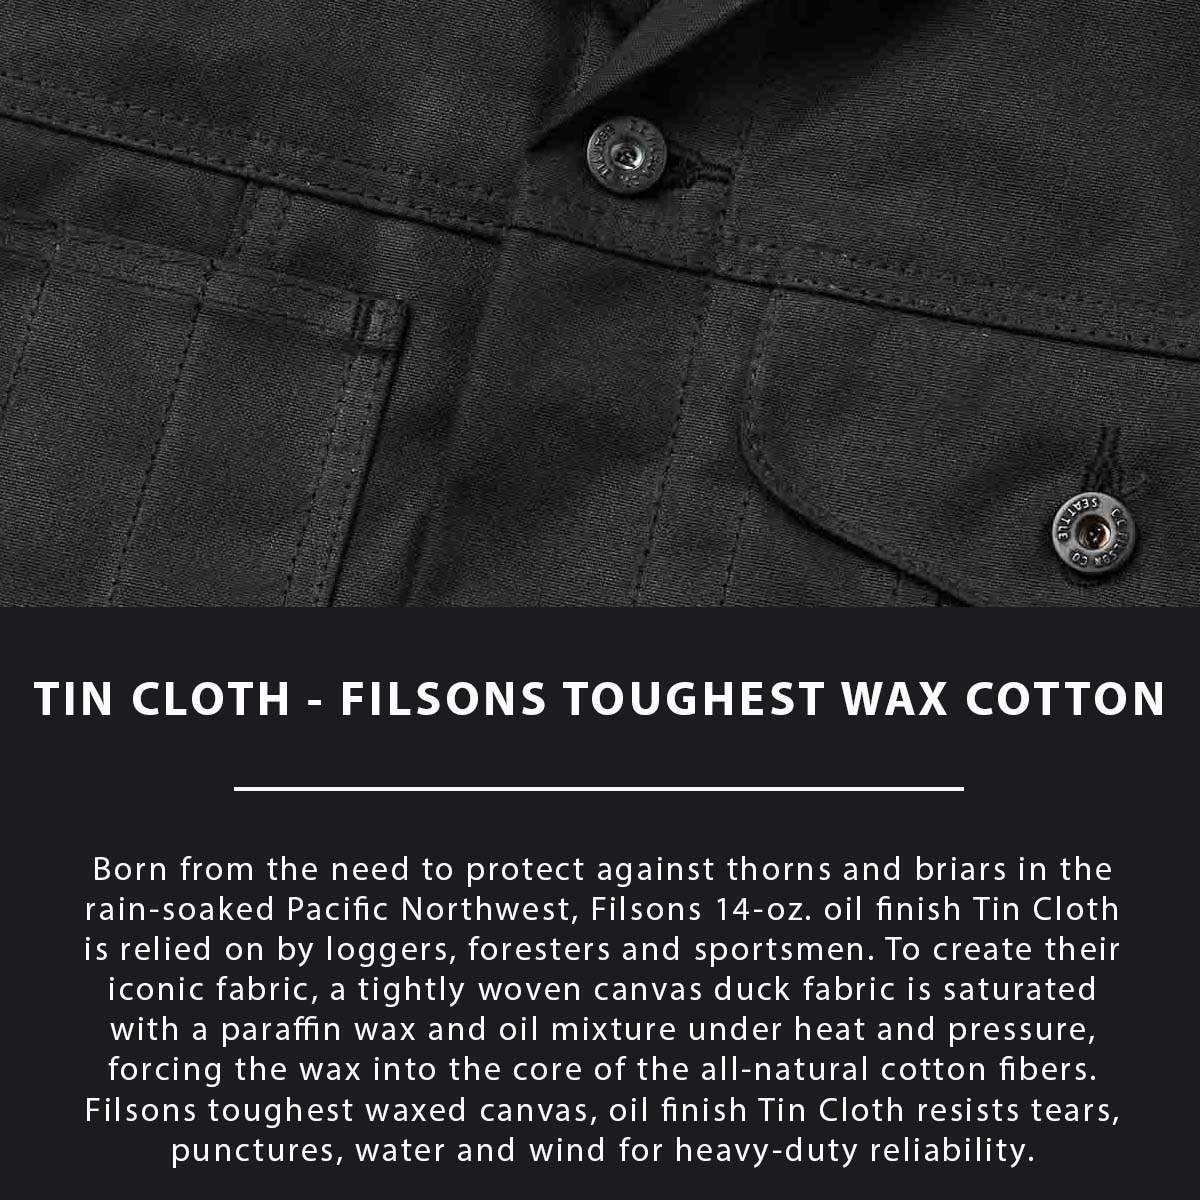 Filson Mackinaw Wool Double Coat, reinforced with legendary super strong, lightweight, and oil impregnated 14-oz. Tin Cloth canvas